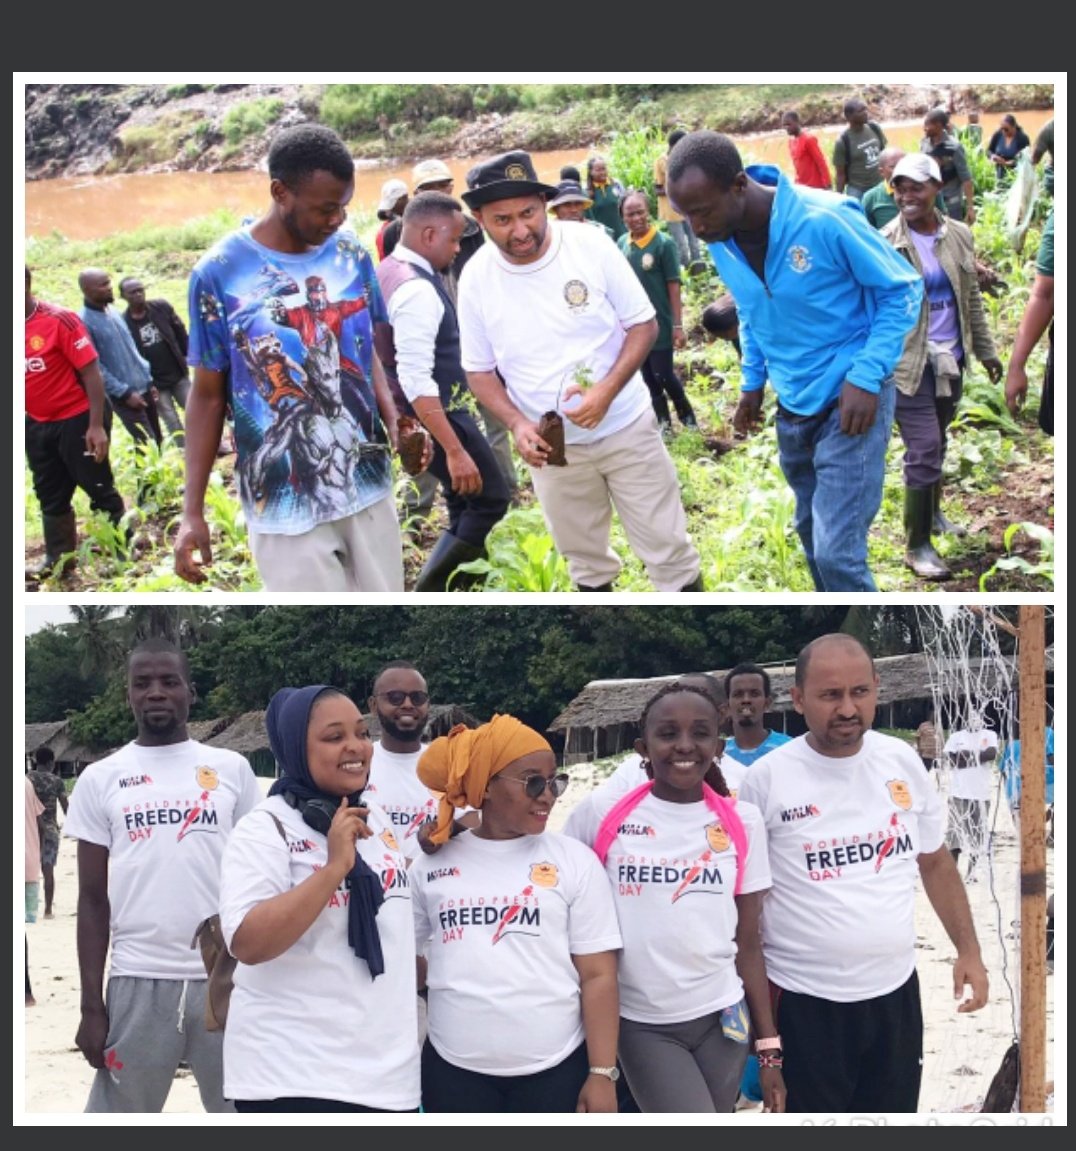 From participating in tree planting in Korogocho, Nairobi, to joining hundreds of Mombasa residents and media colleagues in commemorating World Press Freedom Day with a 10-kilometer walk and a cleanup of Nyali Beach. Let's keep inspiring change.